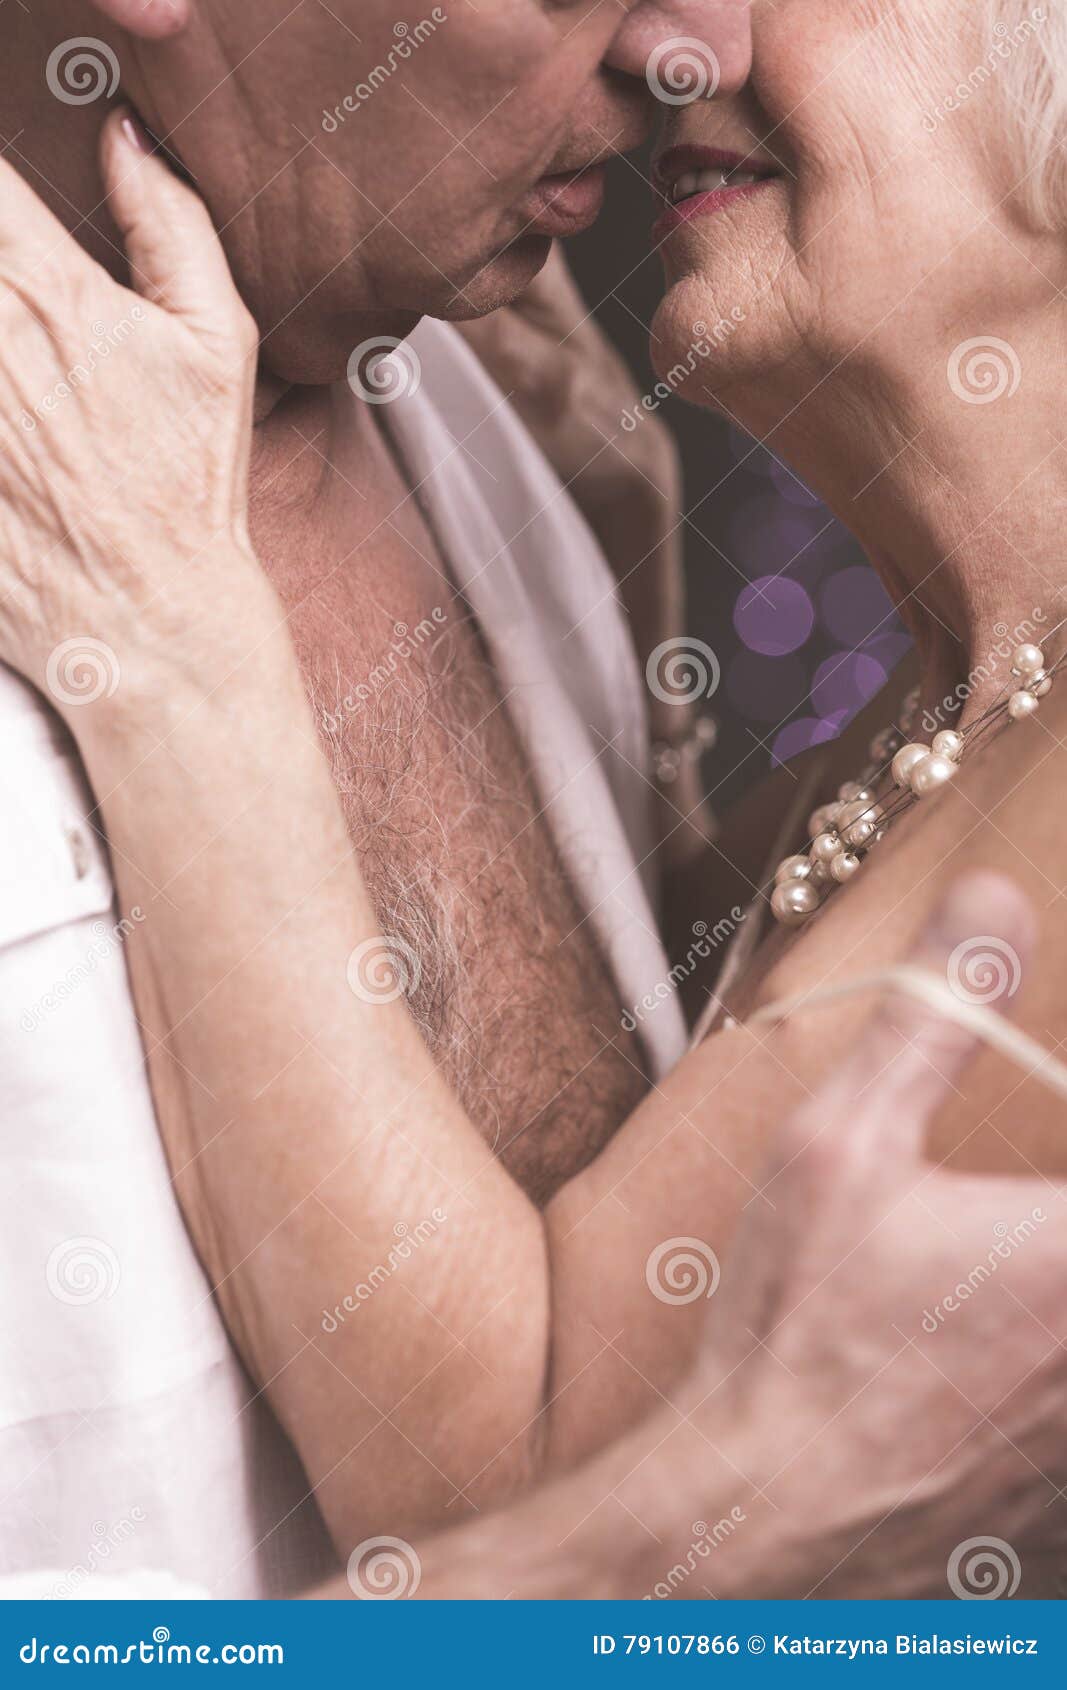 Desire and Sex in the Elderly Stock Photo photo